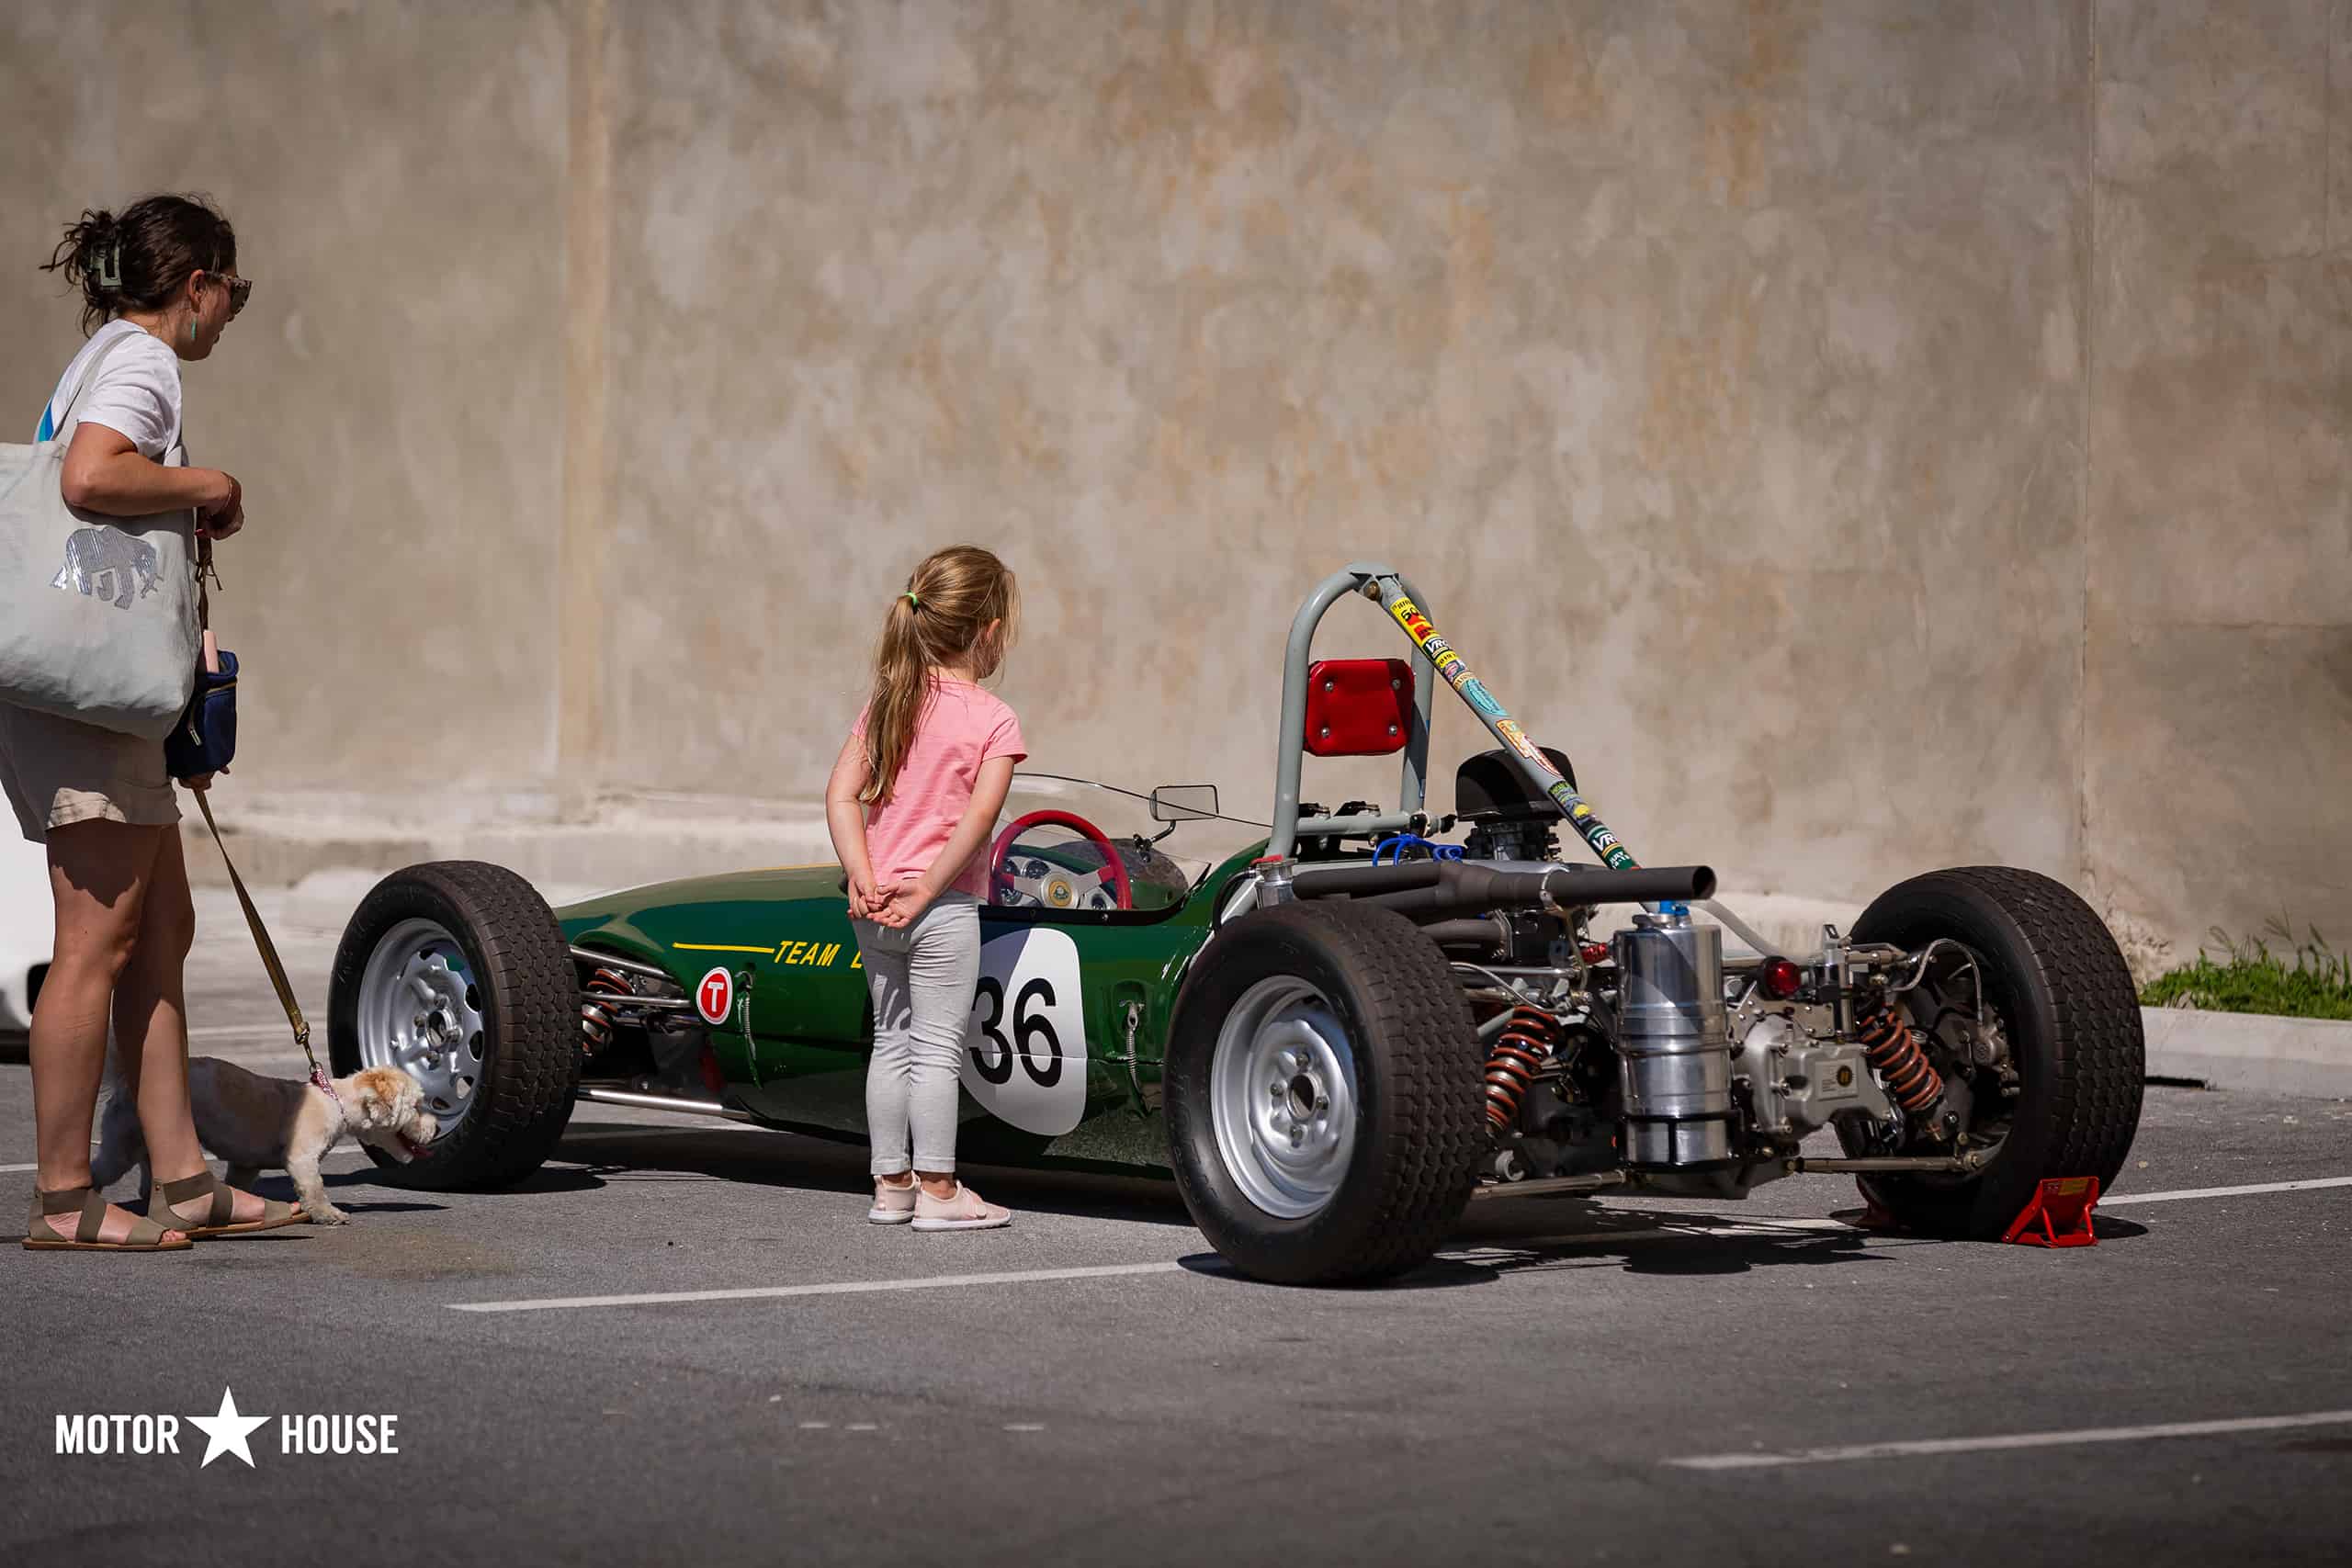 Little Girl looks at race car at the Motor House Auto & Motor Show